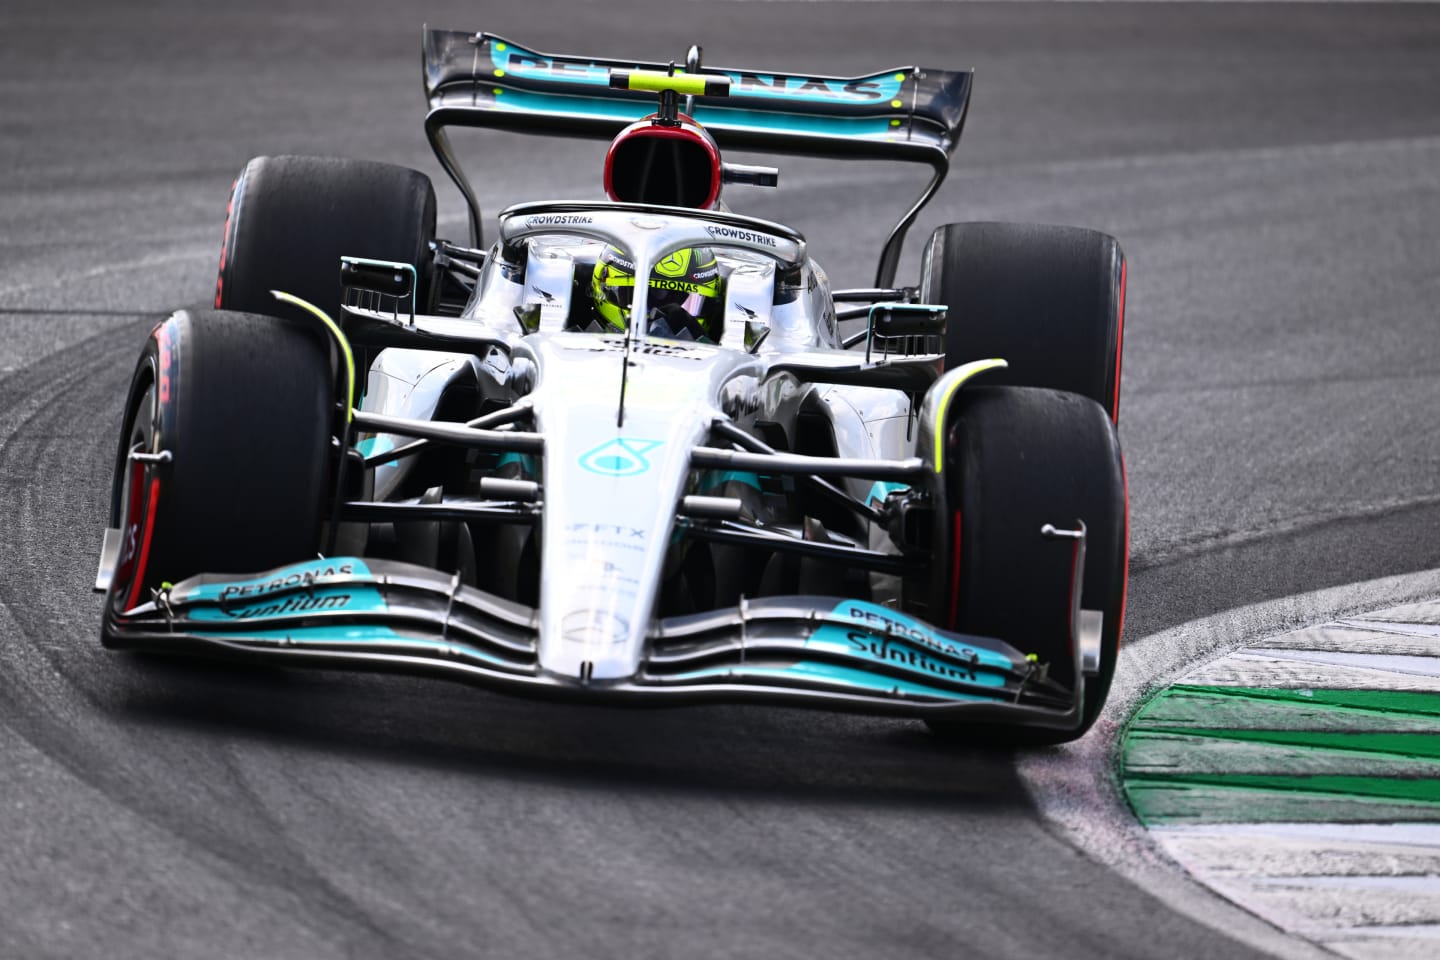 MONZA, ITALY - SEPTEMBER 09: Lewis Hamilton of Great Britain driving the (44) Mercedes AMG Petronas F1 Team W13 on track during practice ahead of the F1 Grand Prix of Italy at Autodromo Nazionale Monza on September 09, 2022 in Monza, Italy. (Photo by Clive Mason/Getty Images)